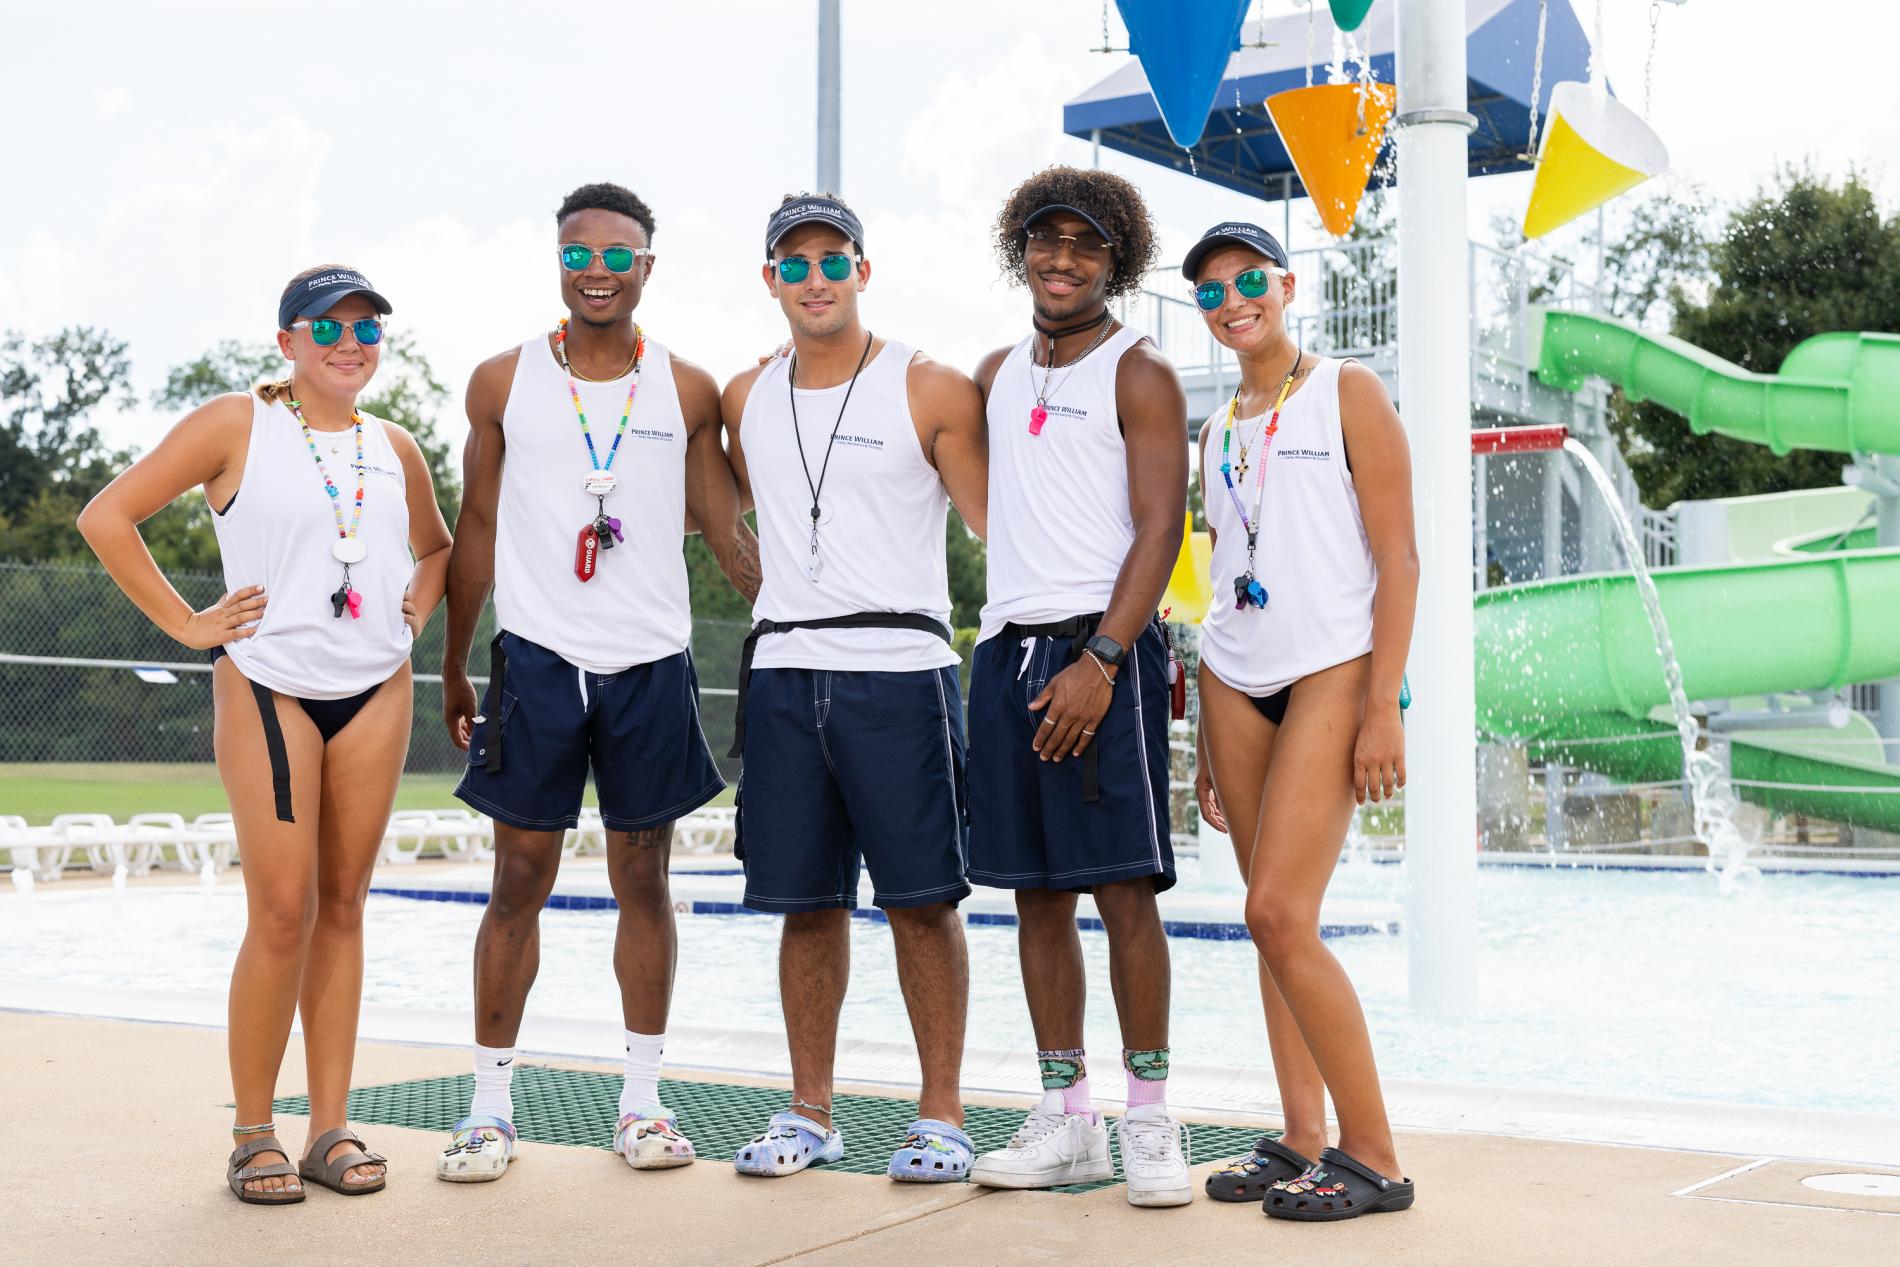 Group of pwcparks lifeguards